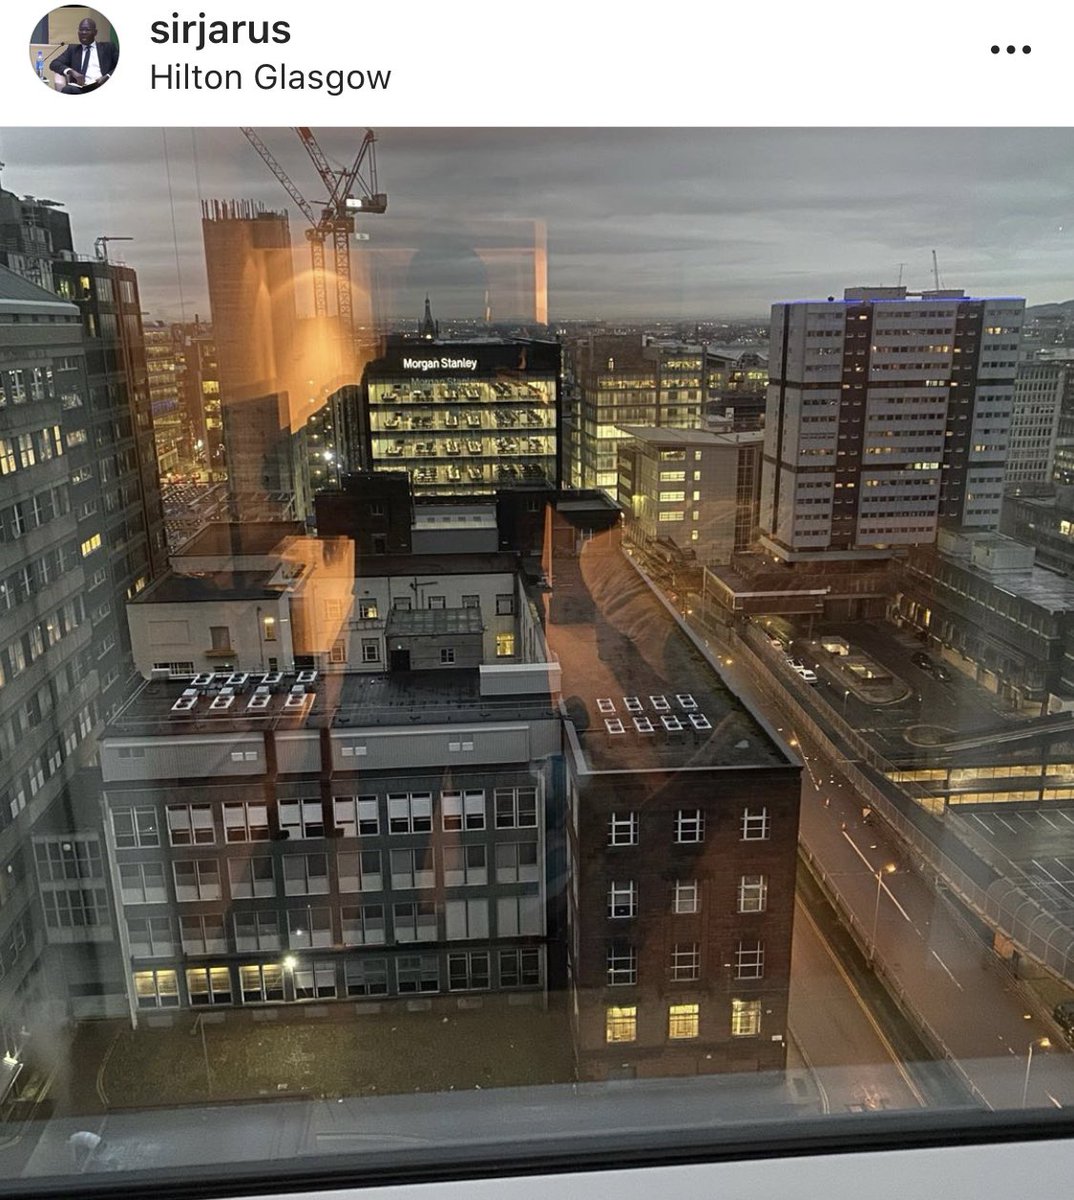 30/ RT and follow for more career & industry comparisons and read JarusHub dot com, Nigeria’s most authoritative career resources websitePIC: A shot of Morgan Stanley’s Glasgow office from 6th floor of Hilton Glasgow when I visited in 2019. MS is one of the top 3 IBs